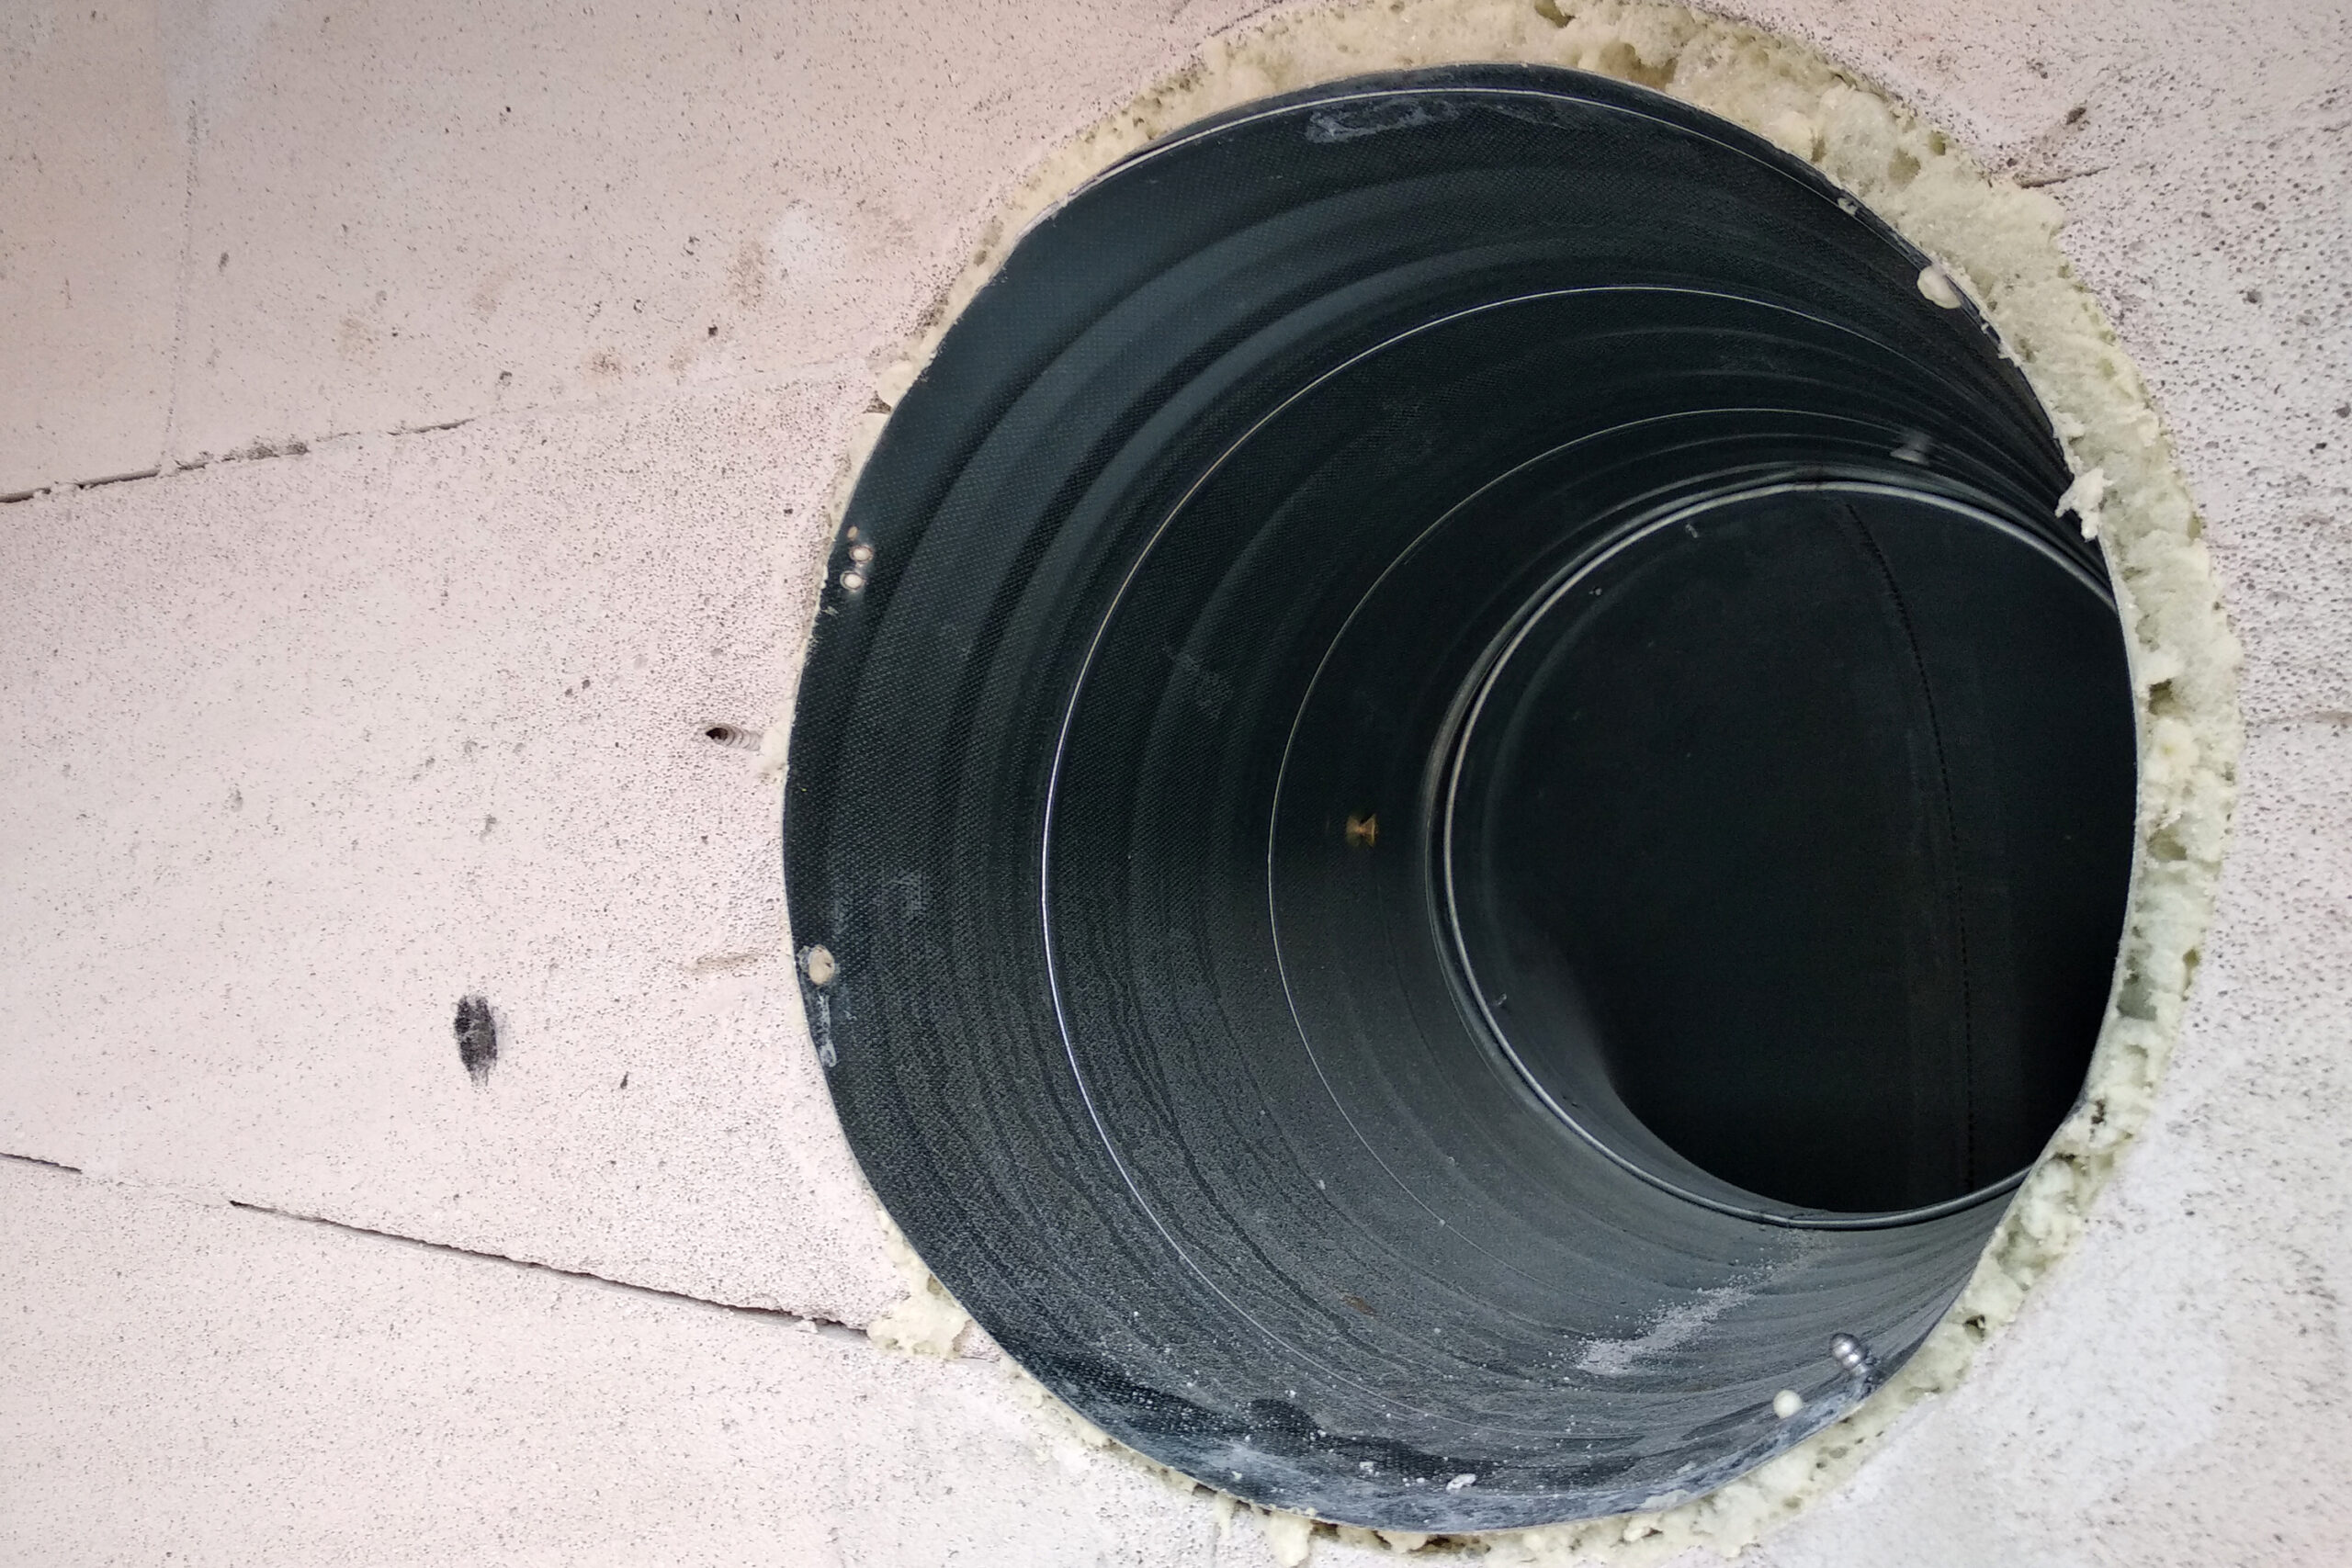 Dryer Vent cleaning